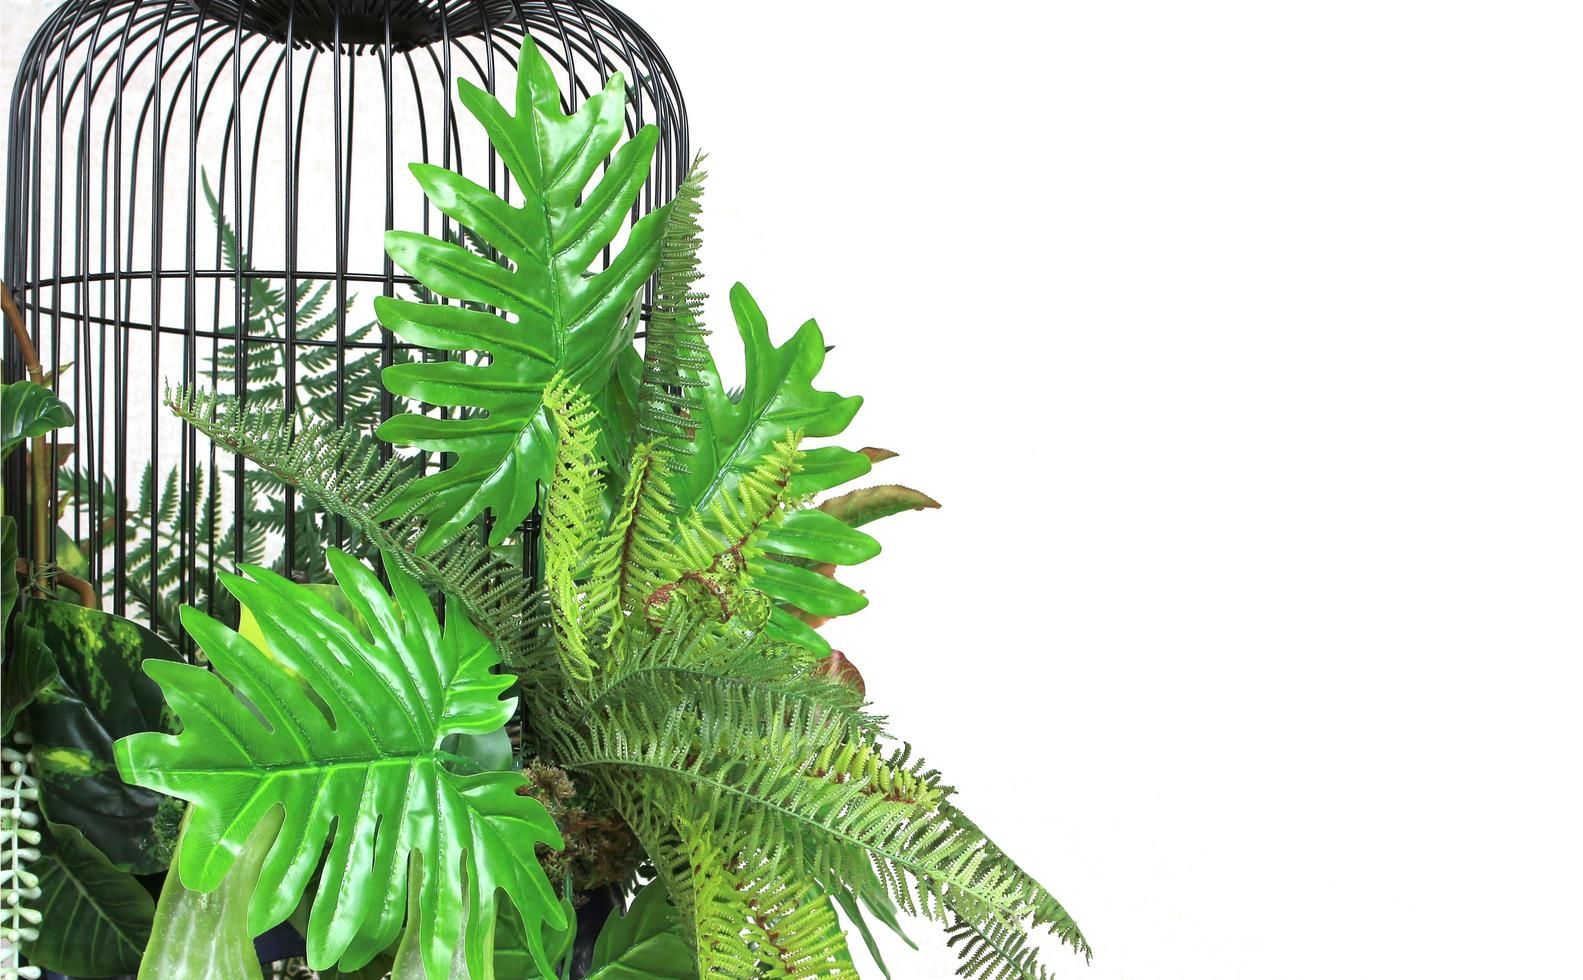 Birdcage and tropical plants photo